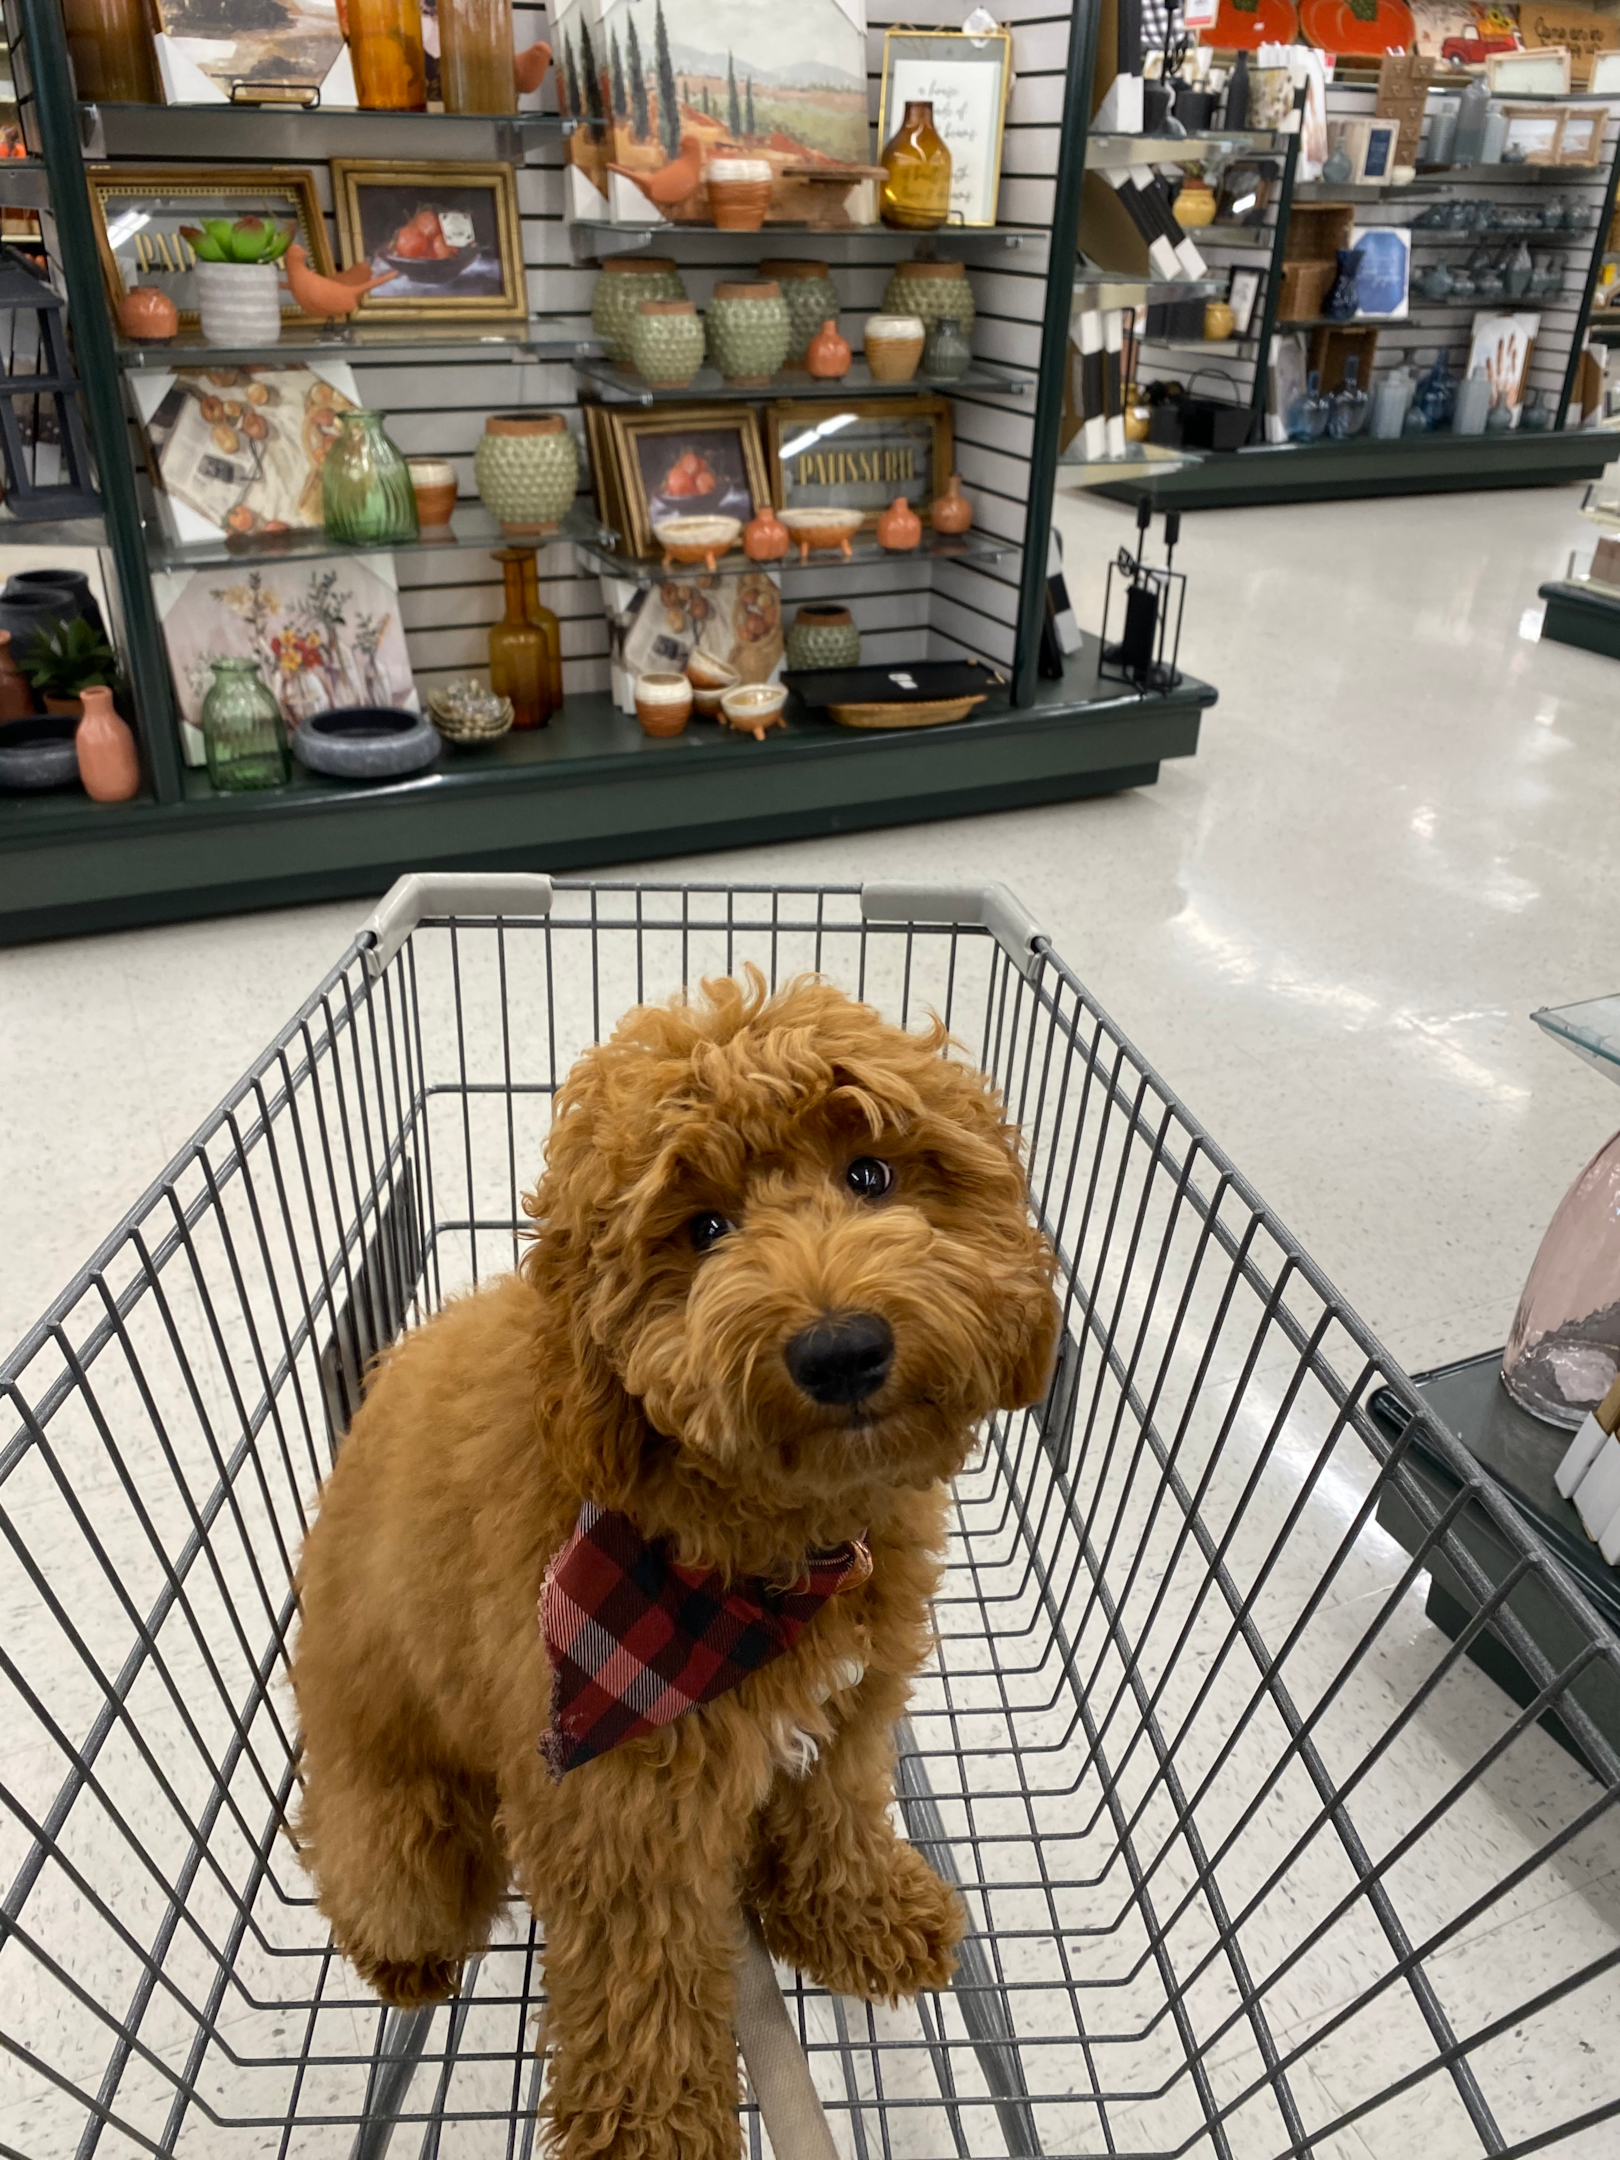 A dog that has been allowed inside a Ross store. It's in the cart and strolling through the home decor section of Ross. 